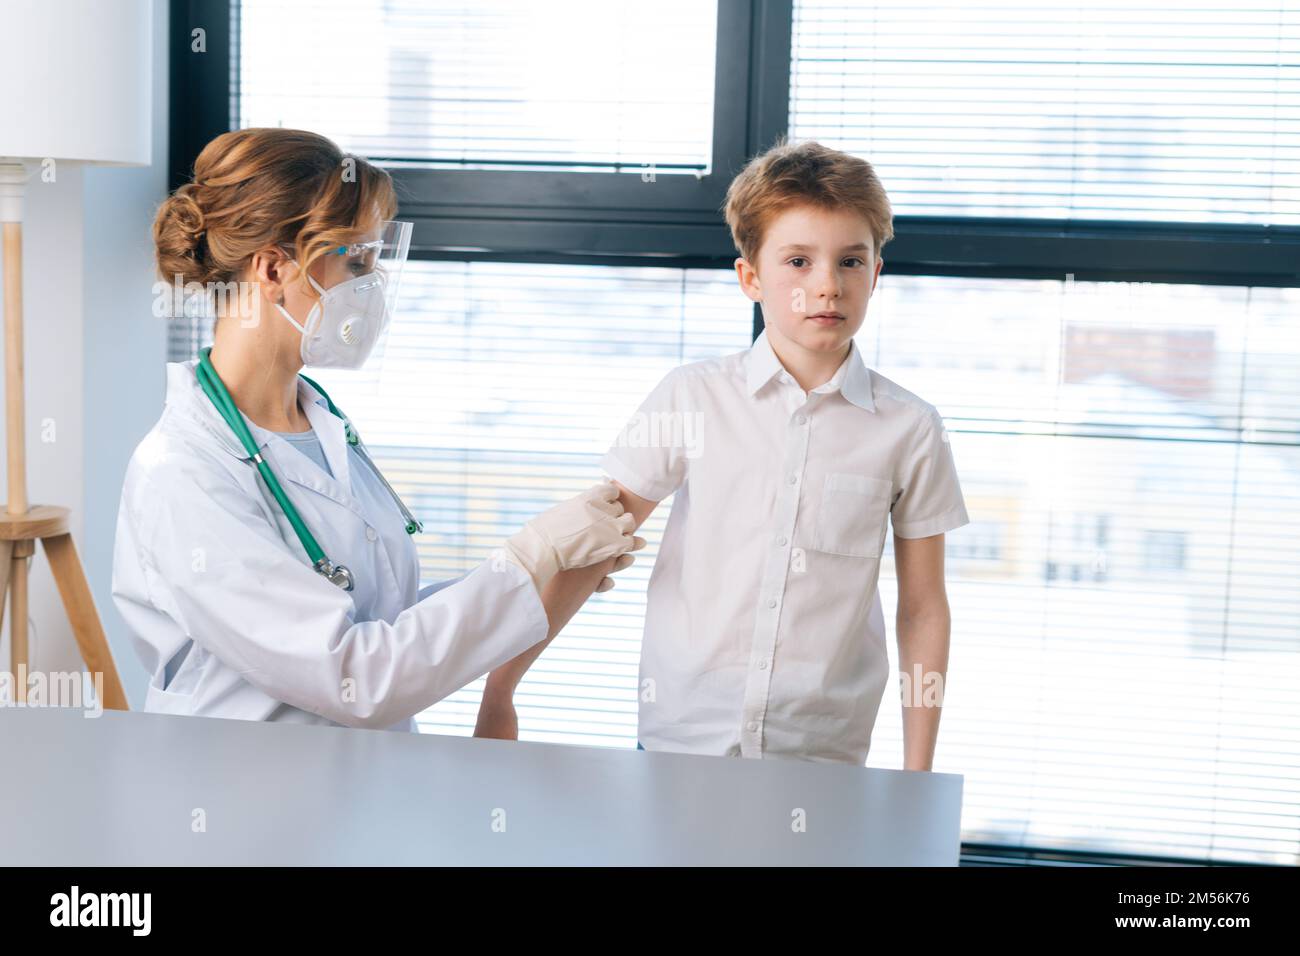 Portrait of female doctor wearing white uniform applying plaster on shoulder of child boy after vaccination injection by window. Stock Photo